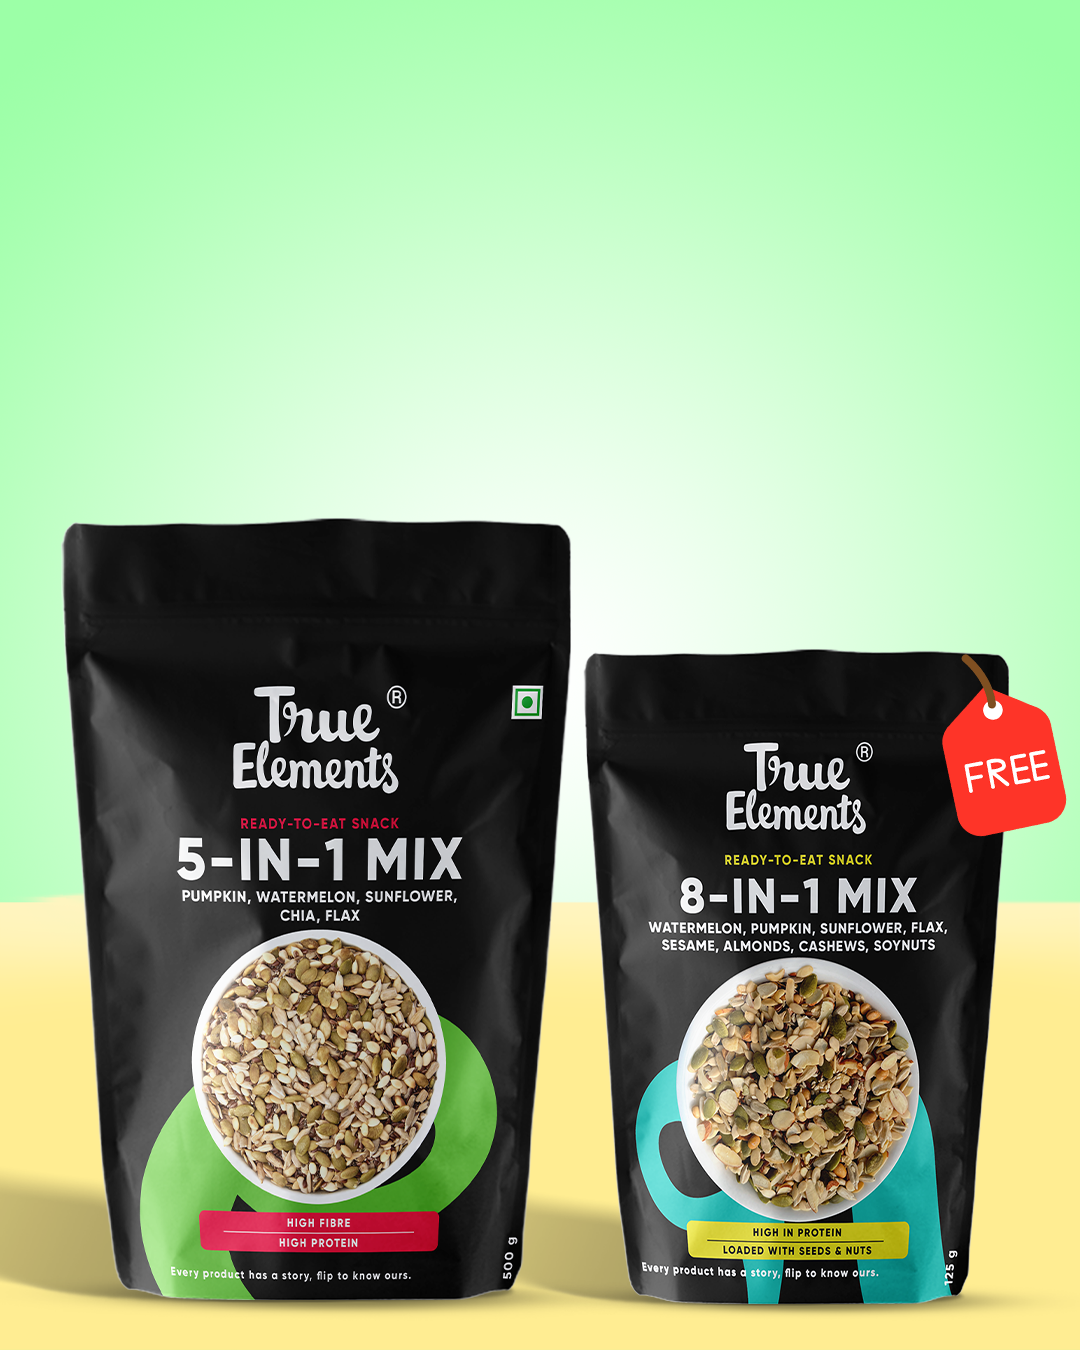 Combo offer Get 8 in 1 mix (125gm) free with, 5 in 1 mix (500gm)